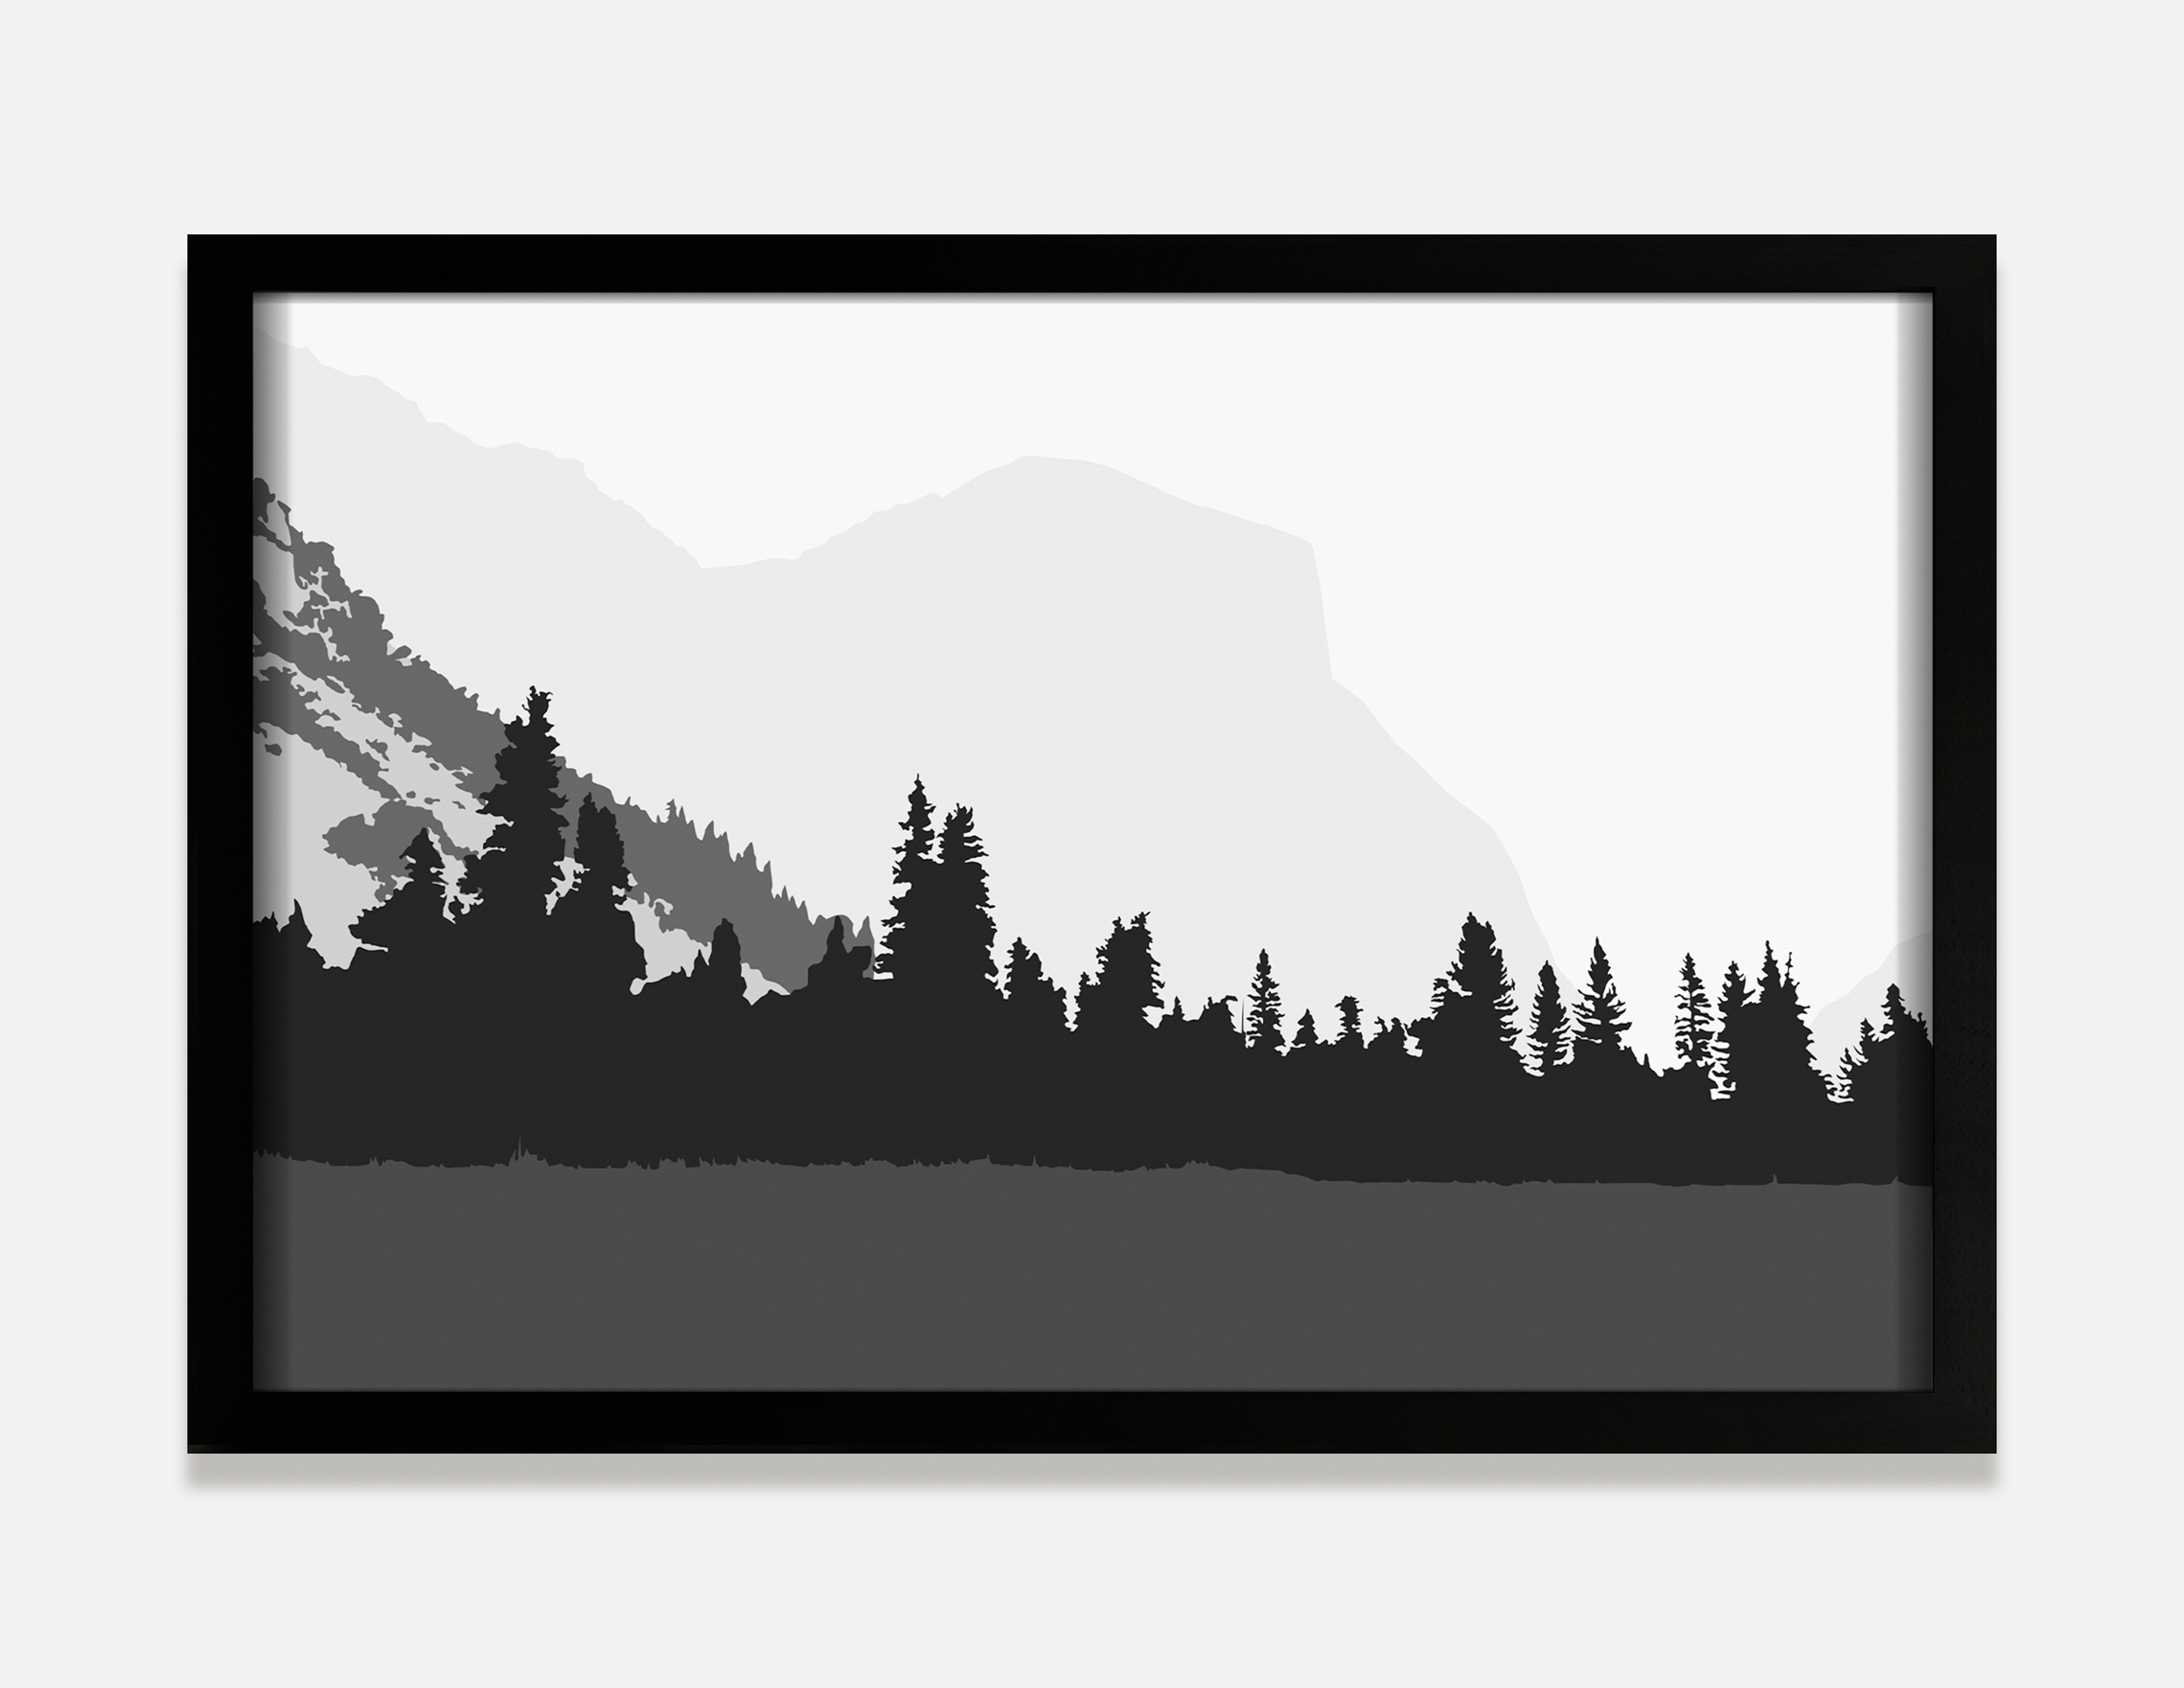 Color image of a black and white transparency on a light box depicting Yosemite with mountains in the distance